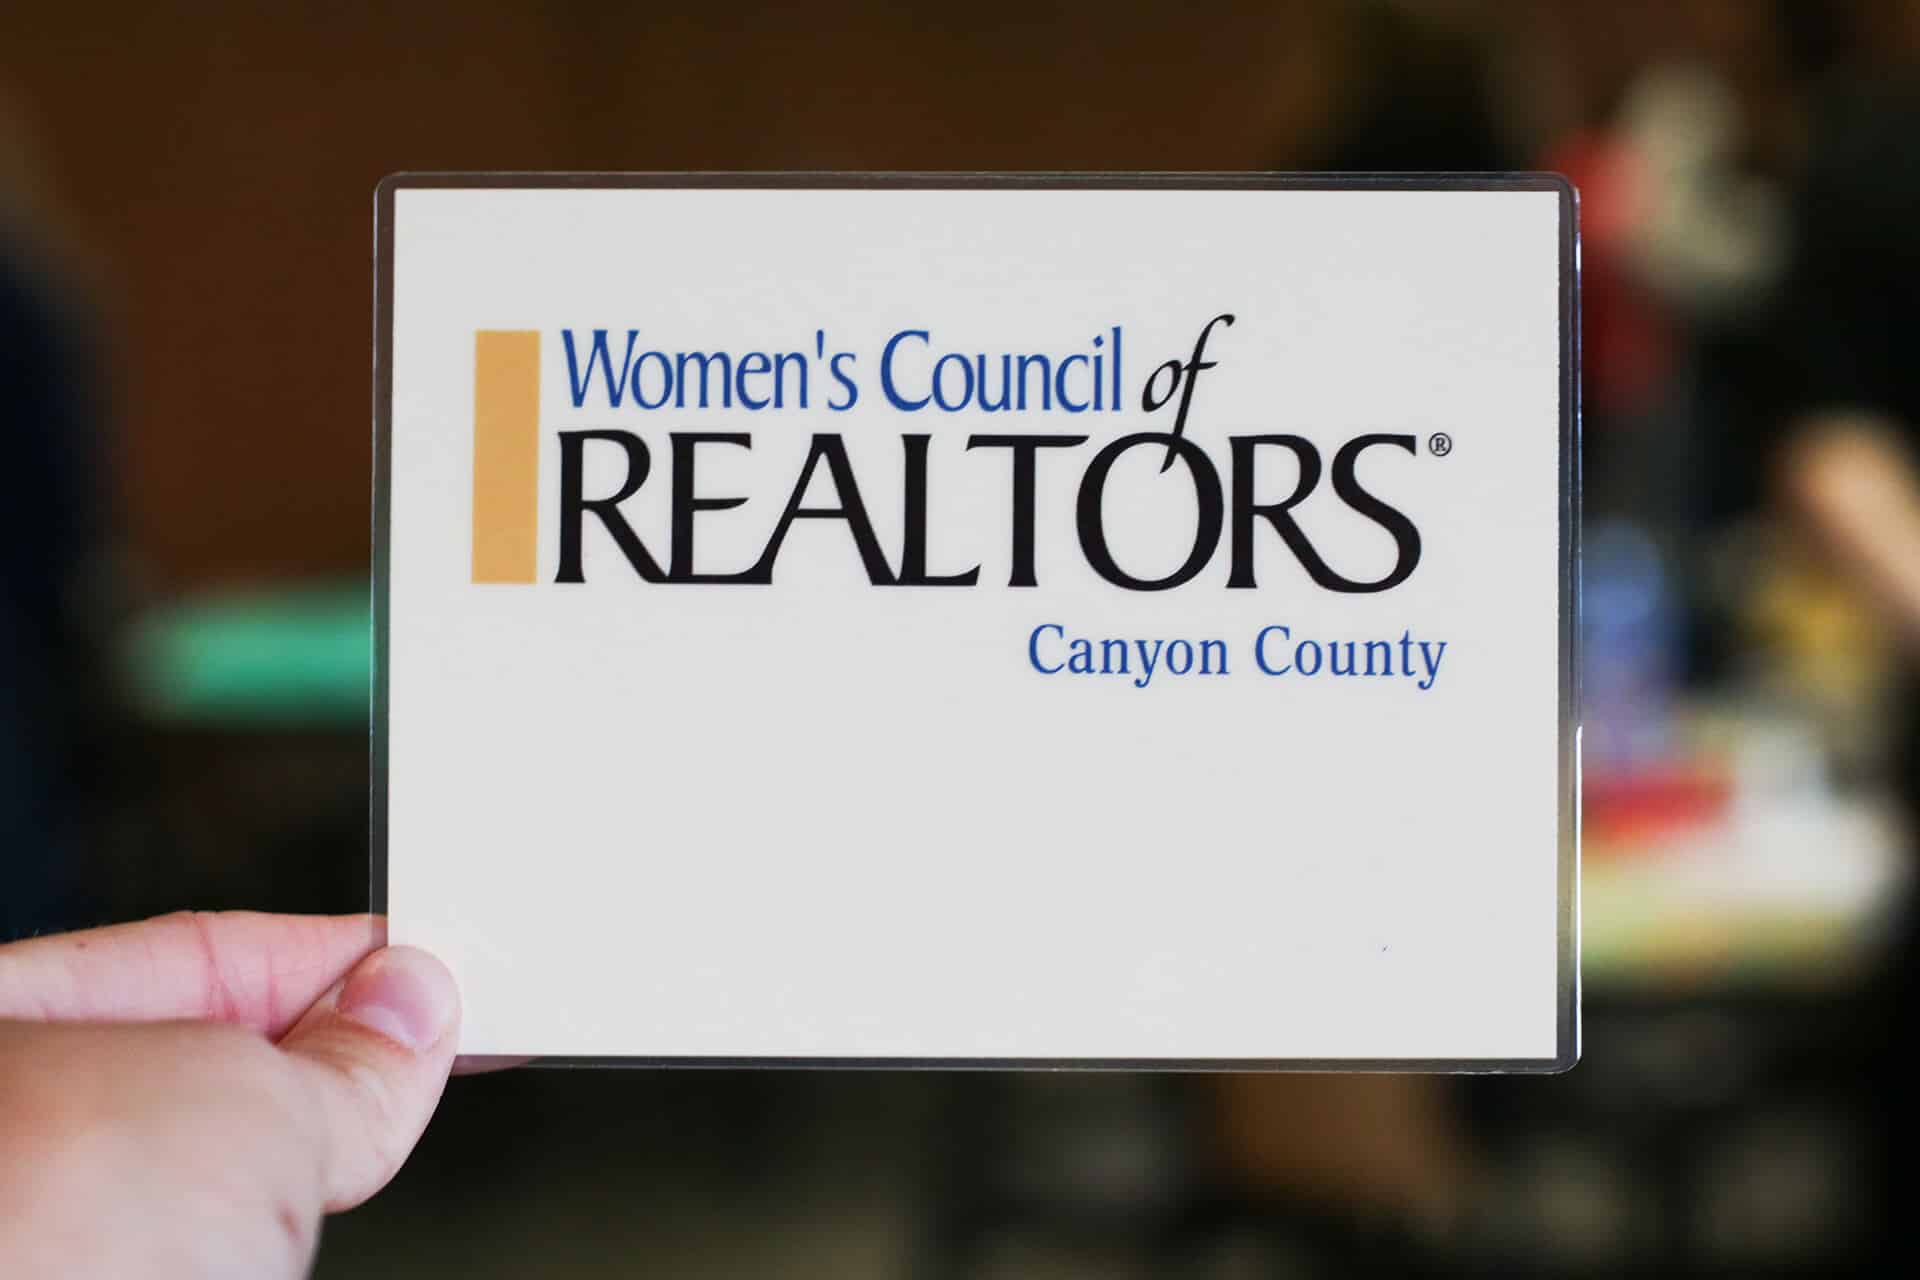 Featured image for “Women’s Council of REALTORS”